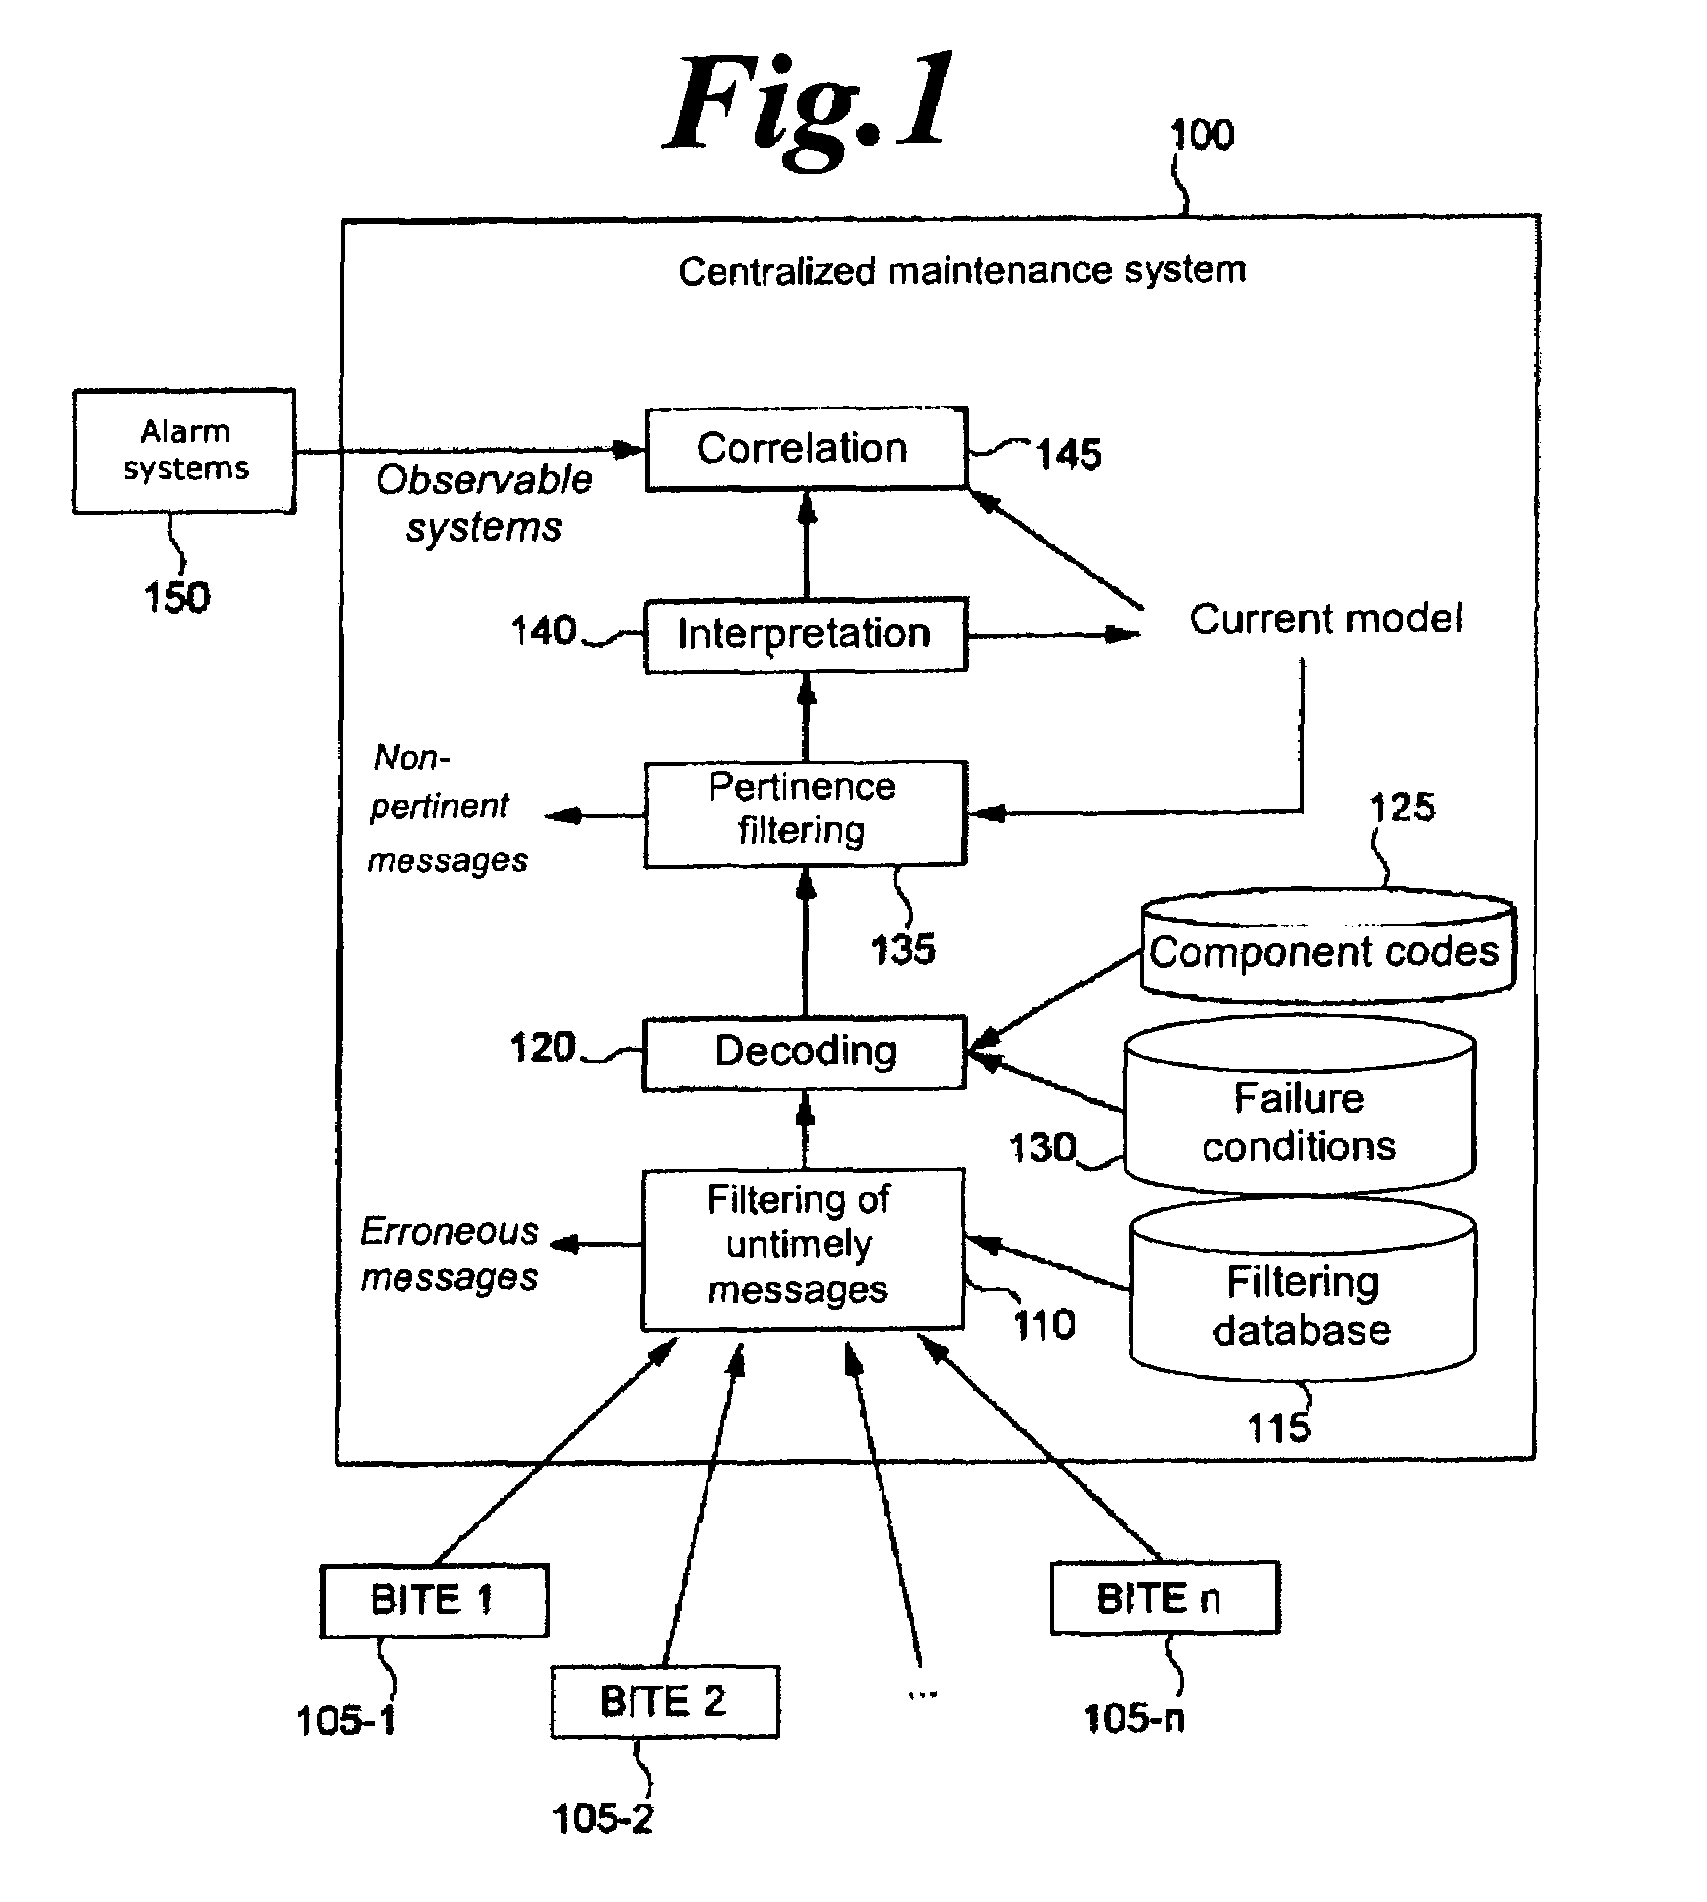 Process and device for diagnostic and maintenance operations of aircraft